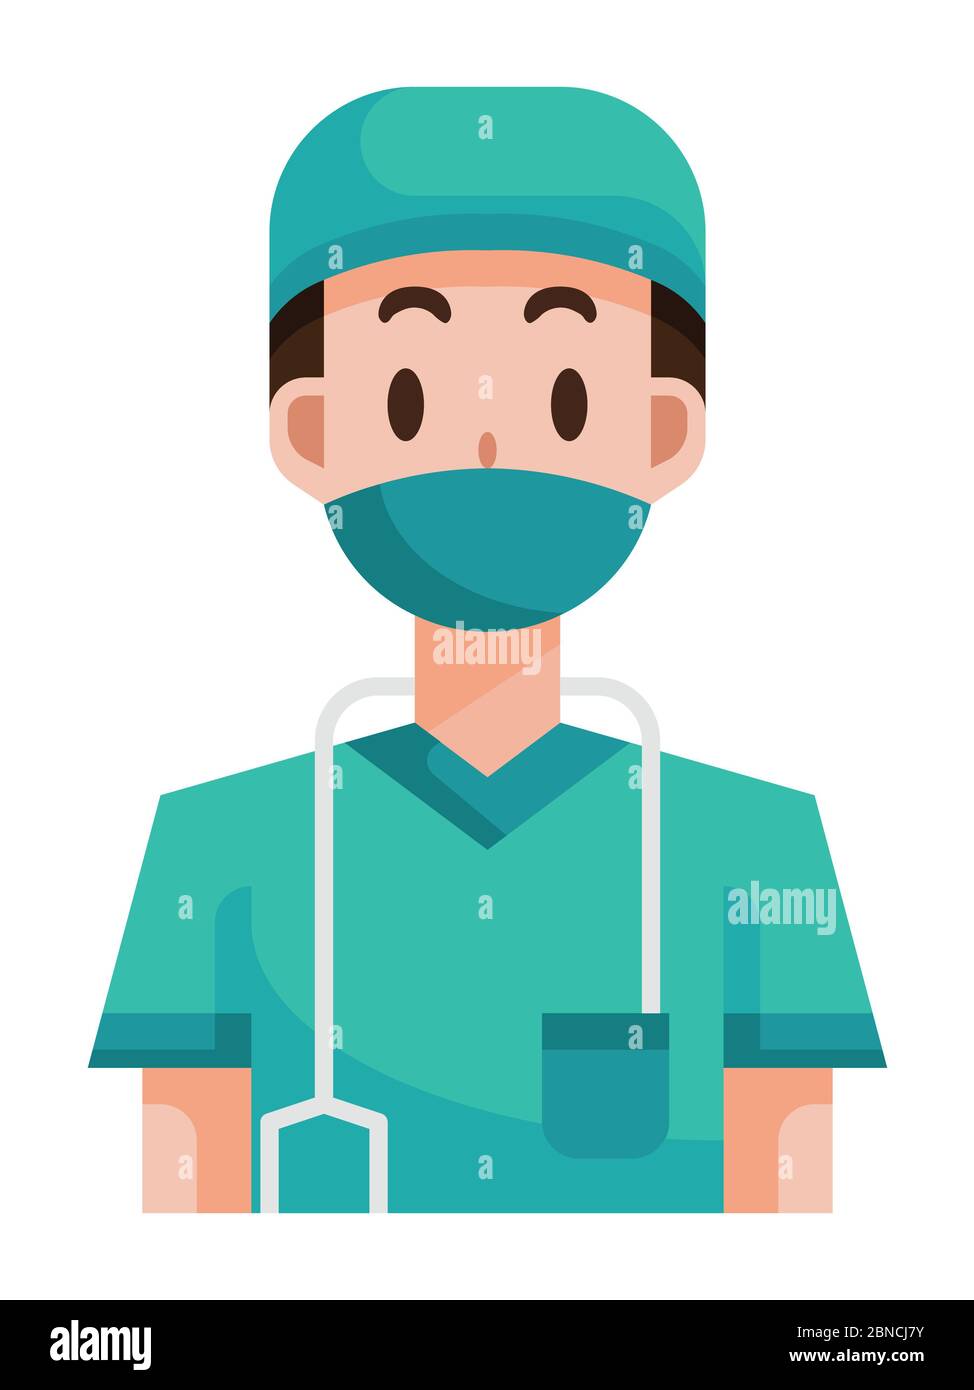 Clip-art Vector Illustration of Doctor Wearing a Protective Face Mask and a Stethoscope during a Corona virus pandemic Stock Photo